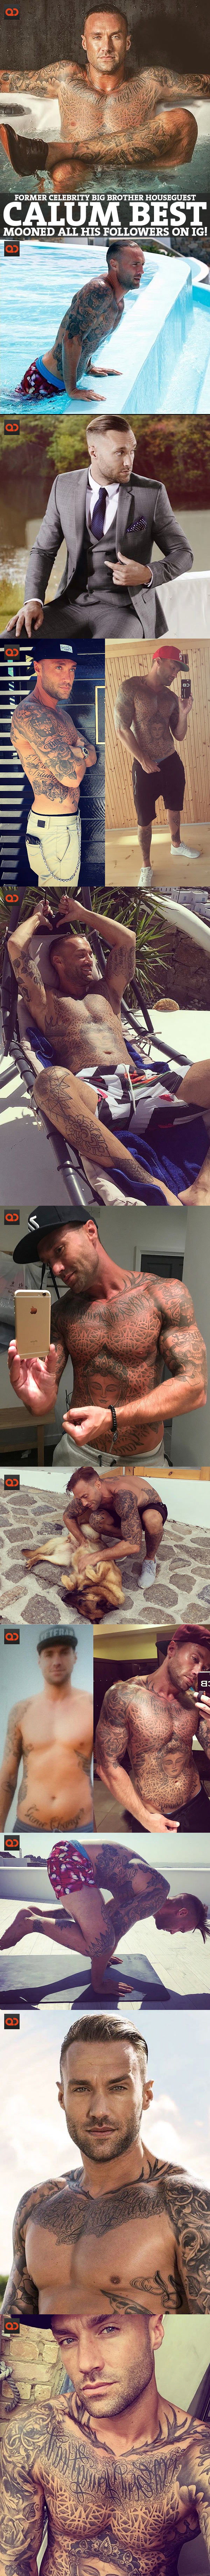 Calum Best, Former Celebrity Big Brother Houseguest, Mooned All His Followers On IG!